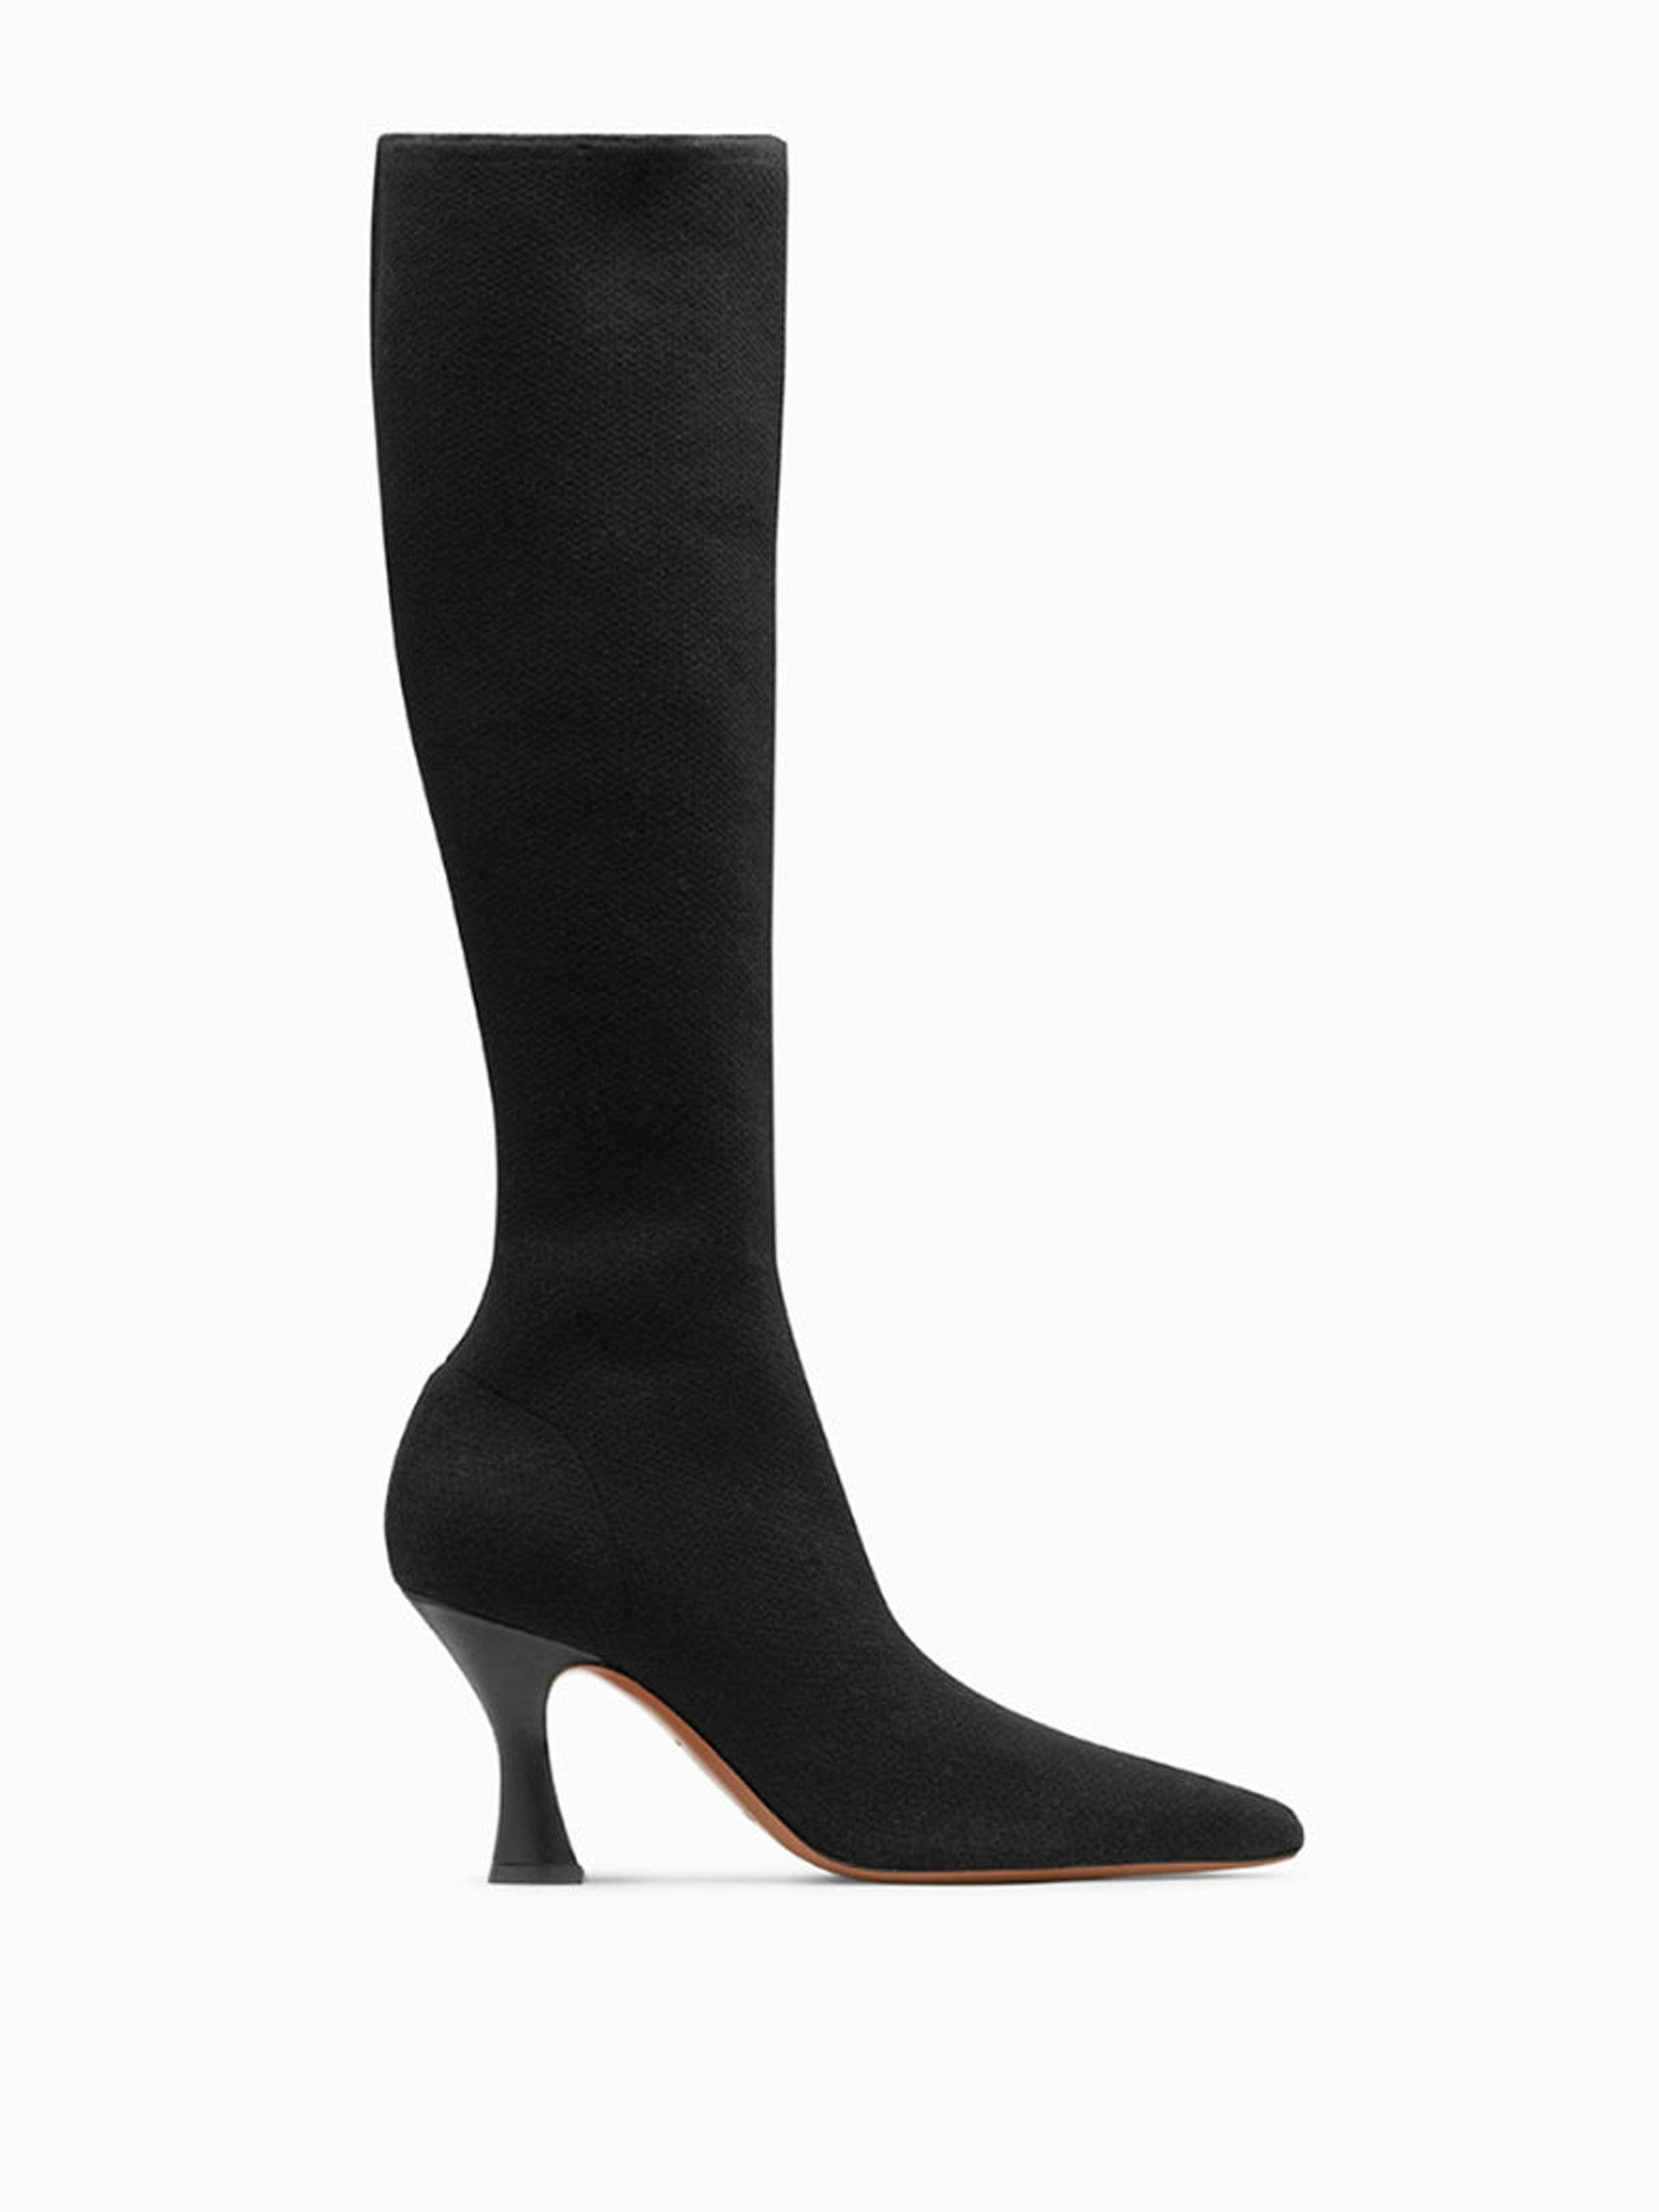 Black knit Ran under the knee boot